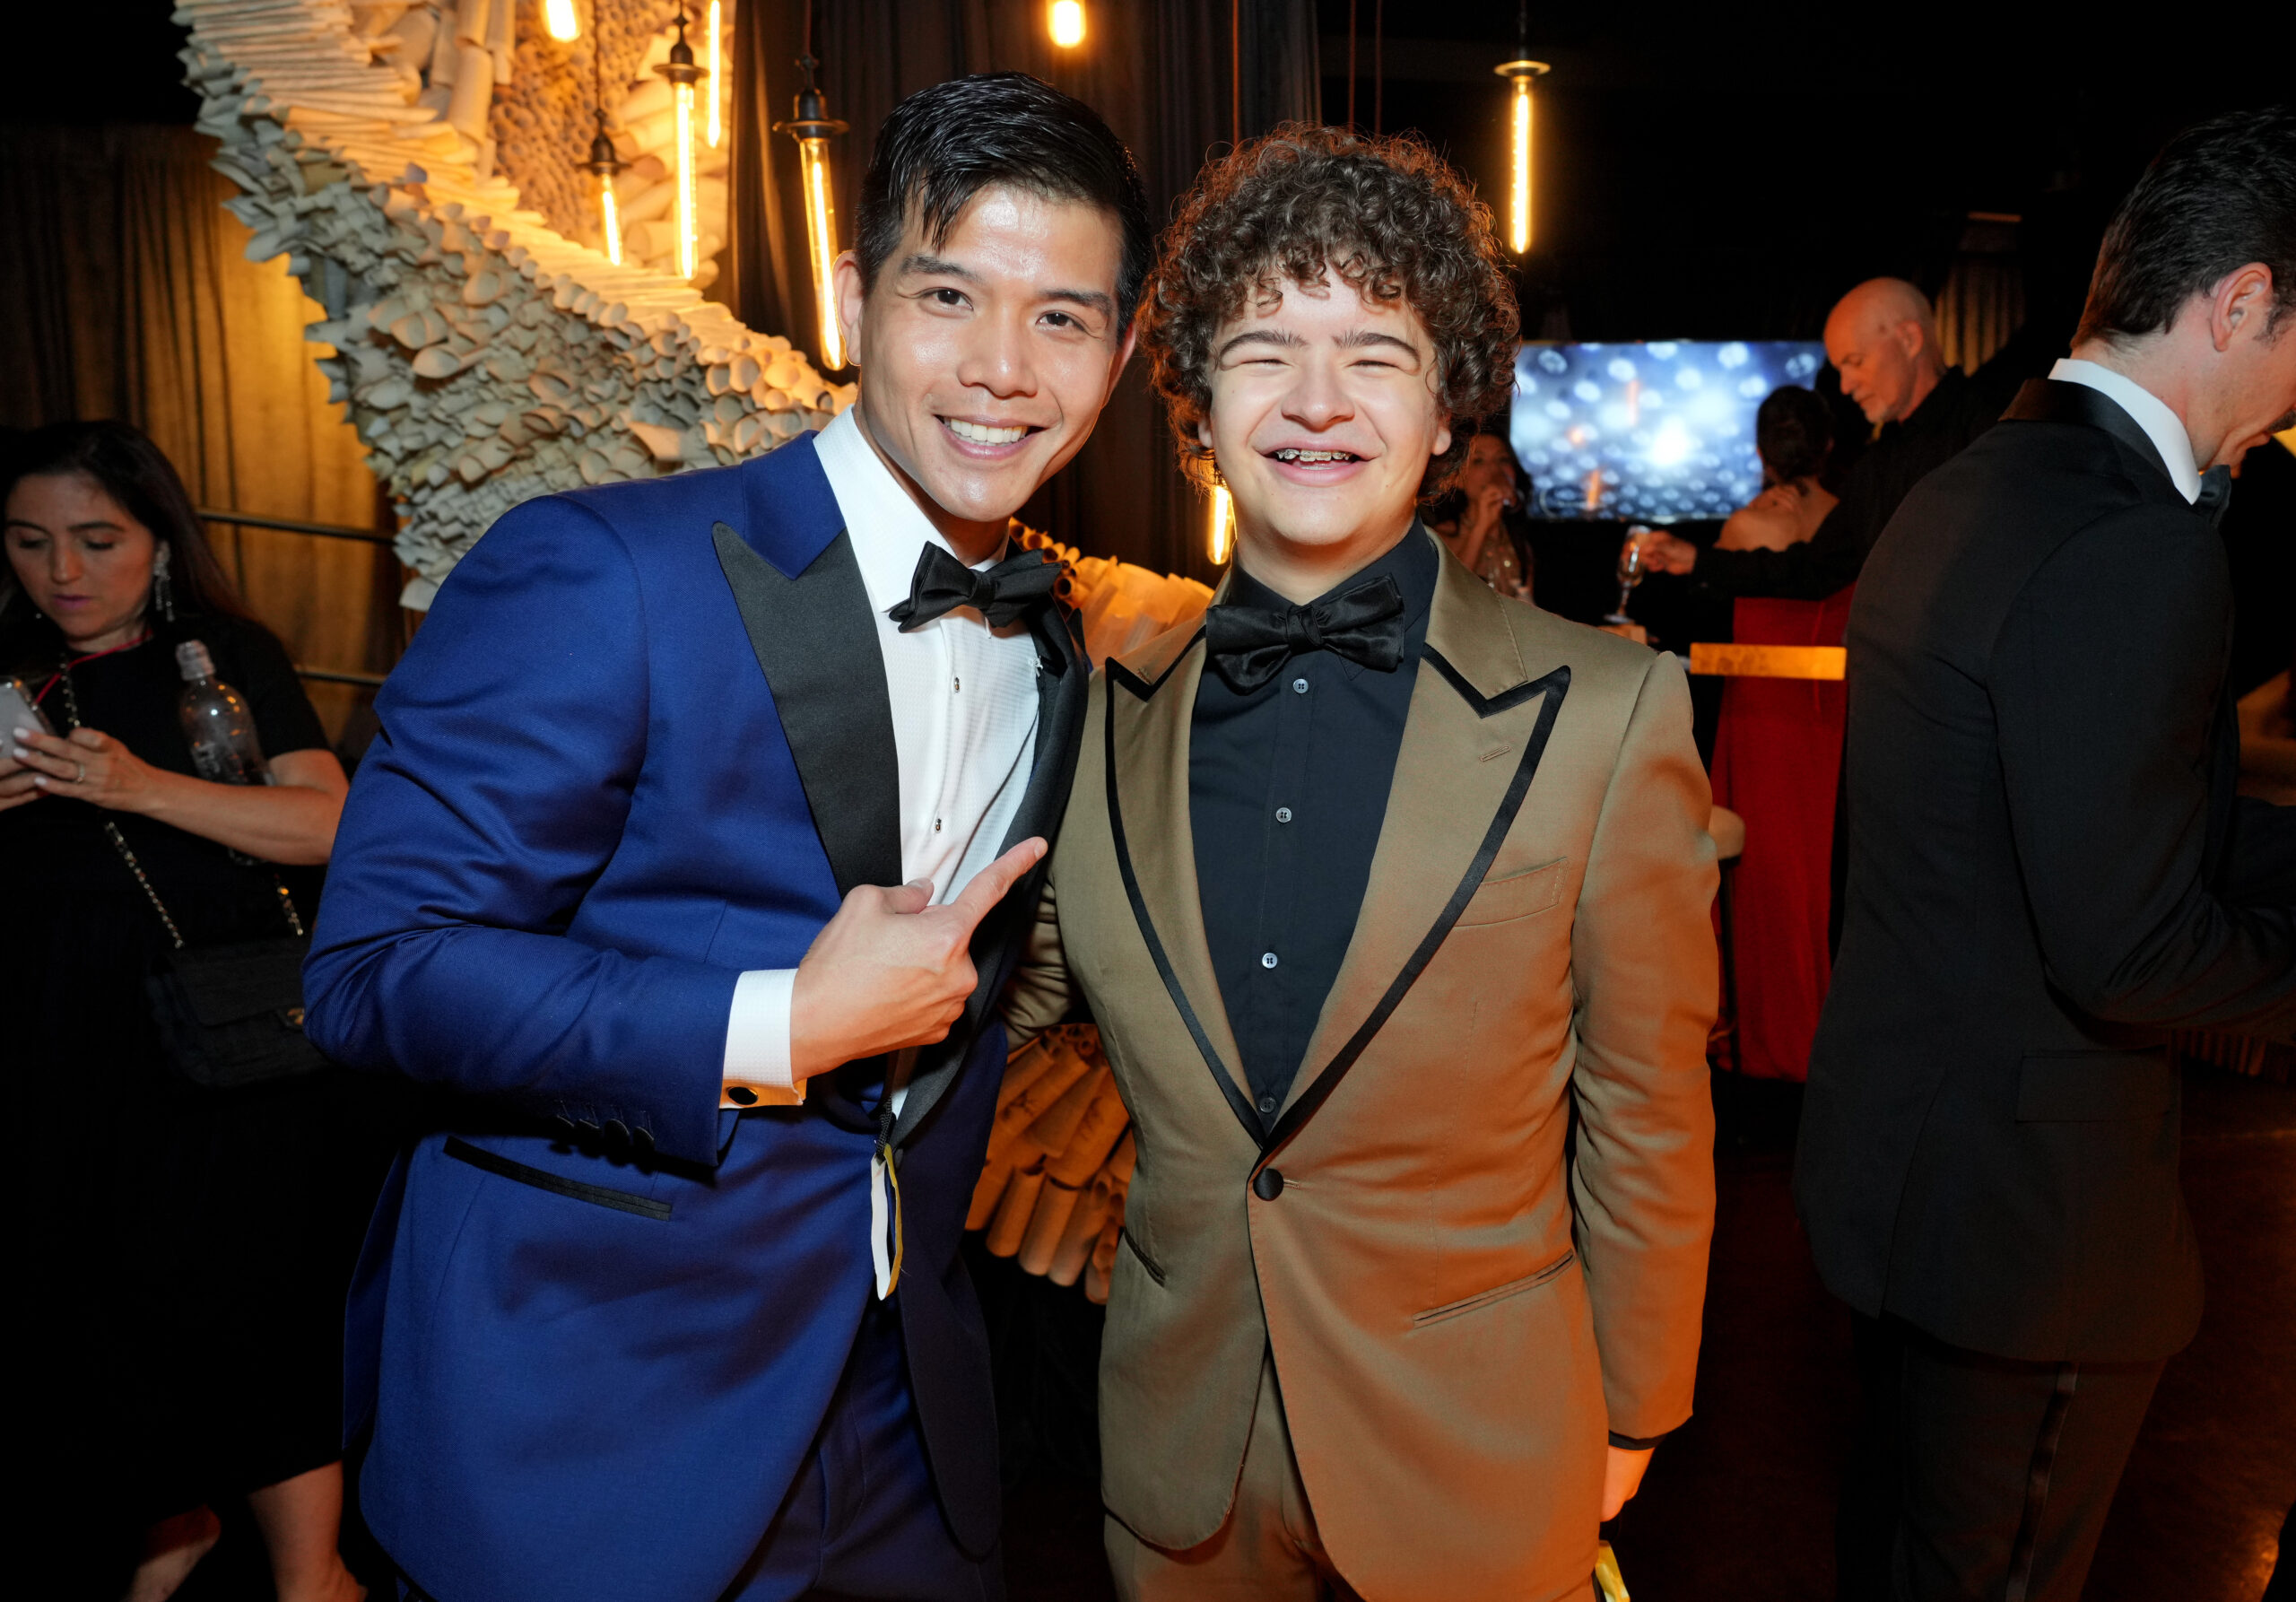 Telly Leung and Gaten Matarazzo at the 75th Annual Tony Awards. Photo by Kevin Mazur/Getty Images for Tony Awards Productions.